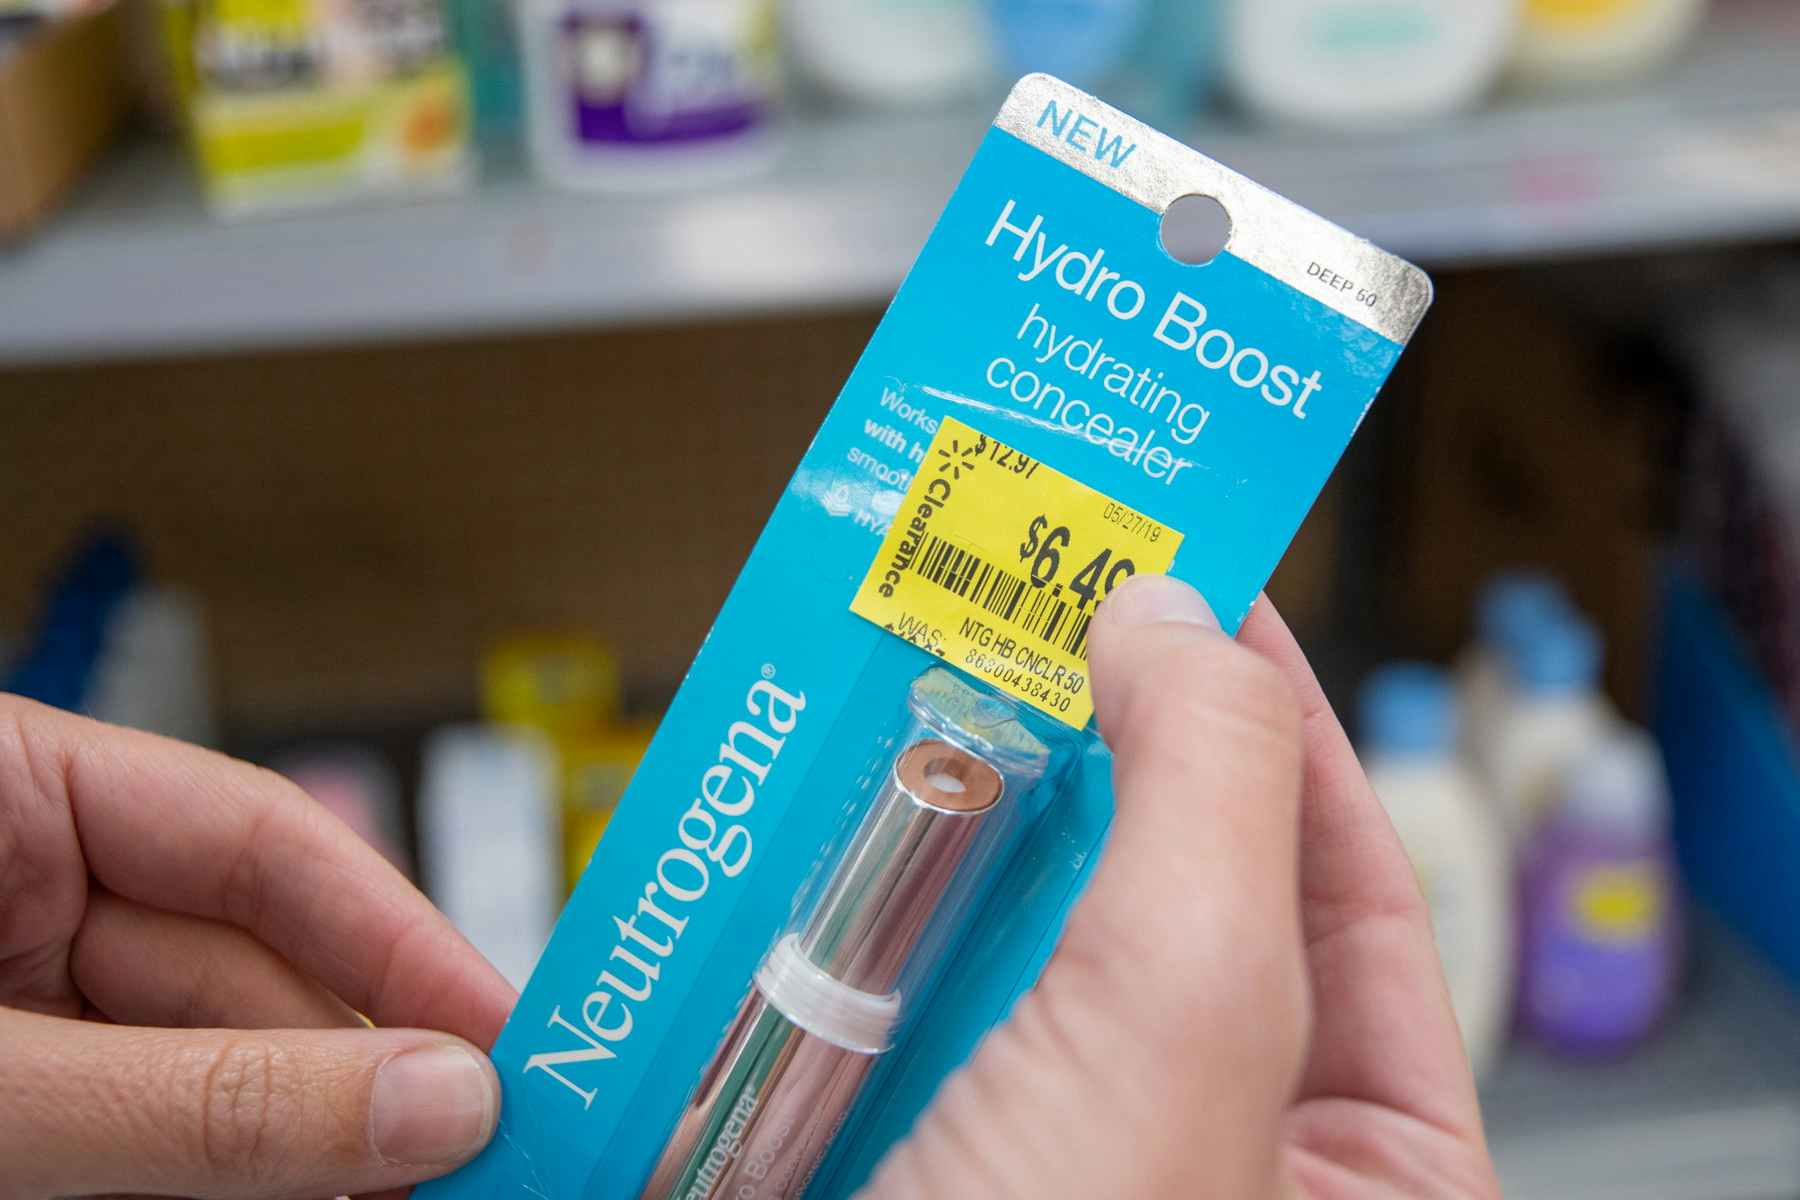 A person holding a Neutrogena Hydro Boost hydrating concealer with a Walmart clearance sticker on it.